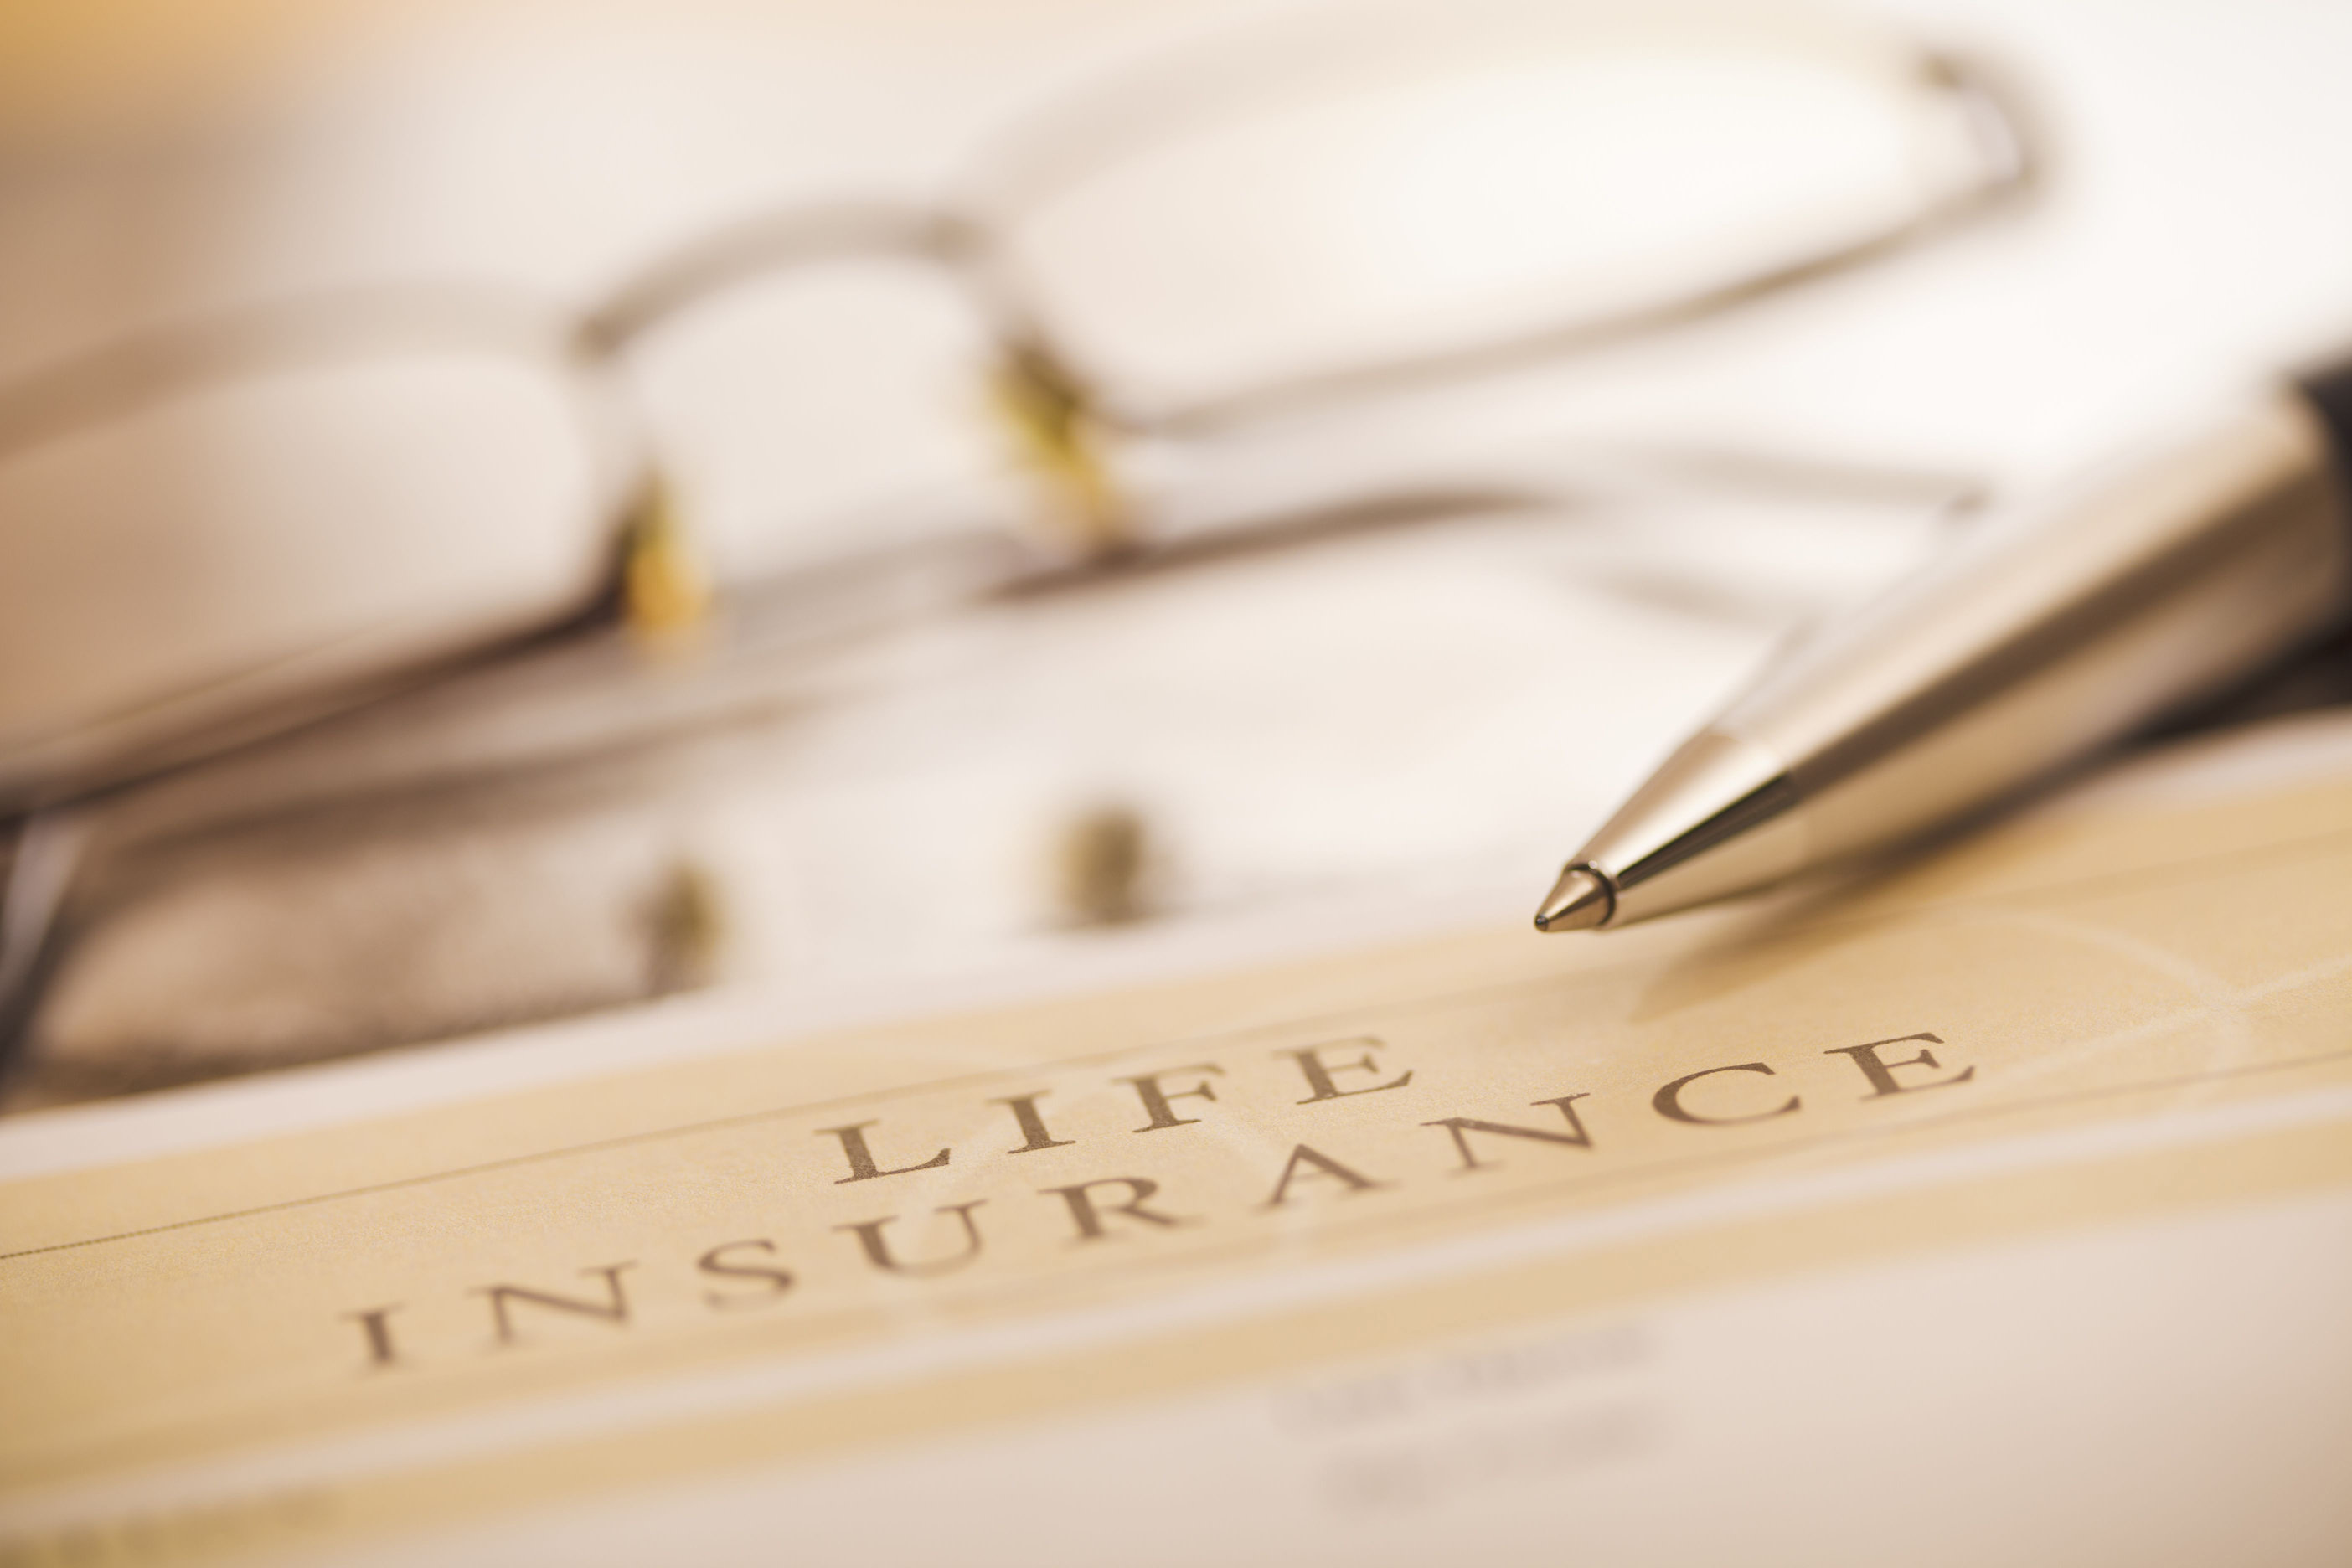 Who Should Be The Owner Of A Life Insurance Policy?